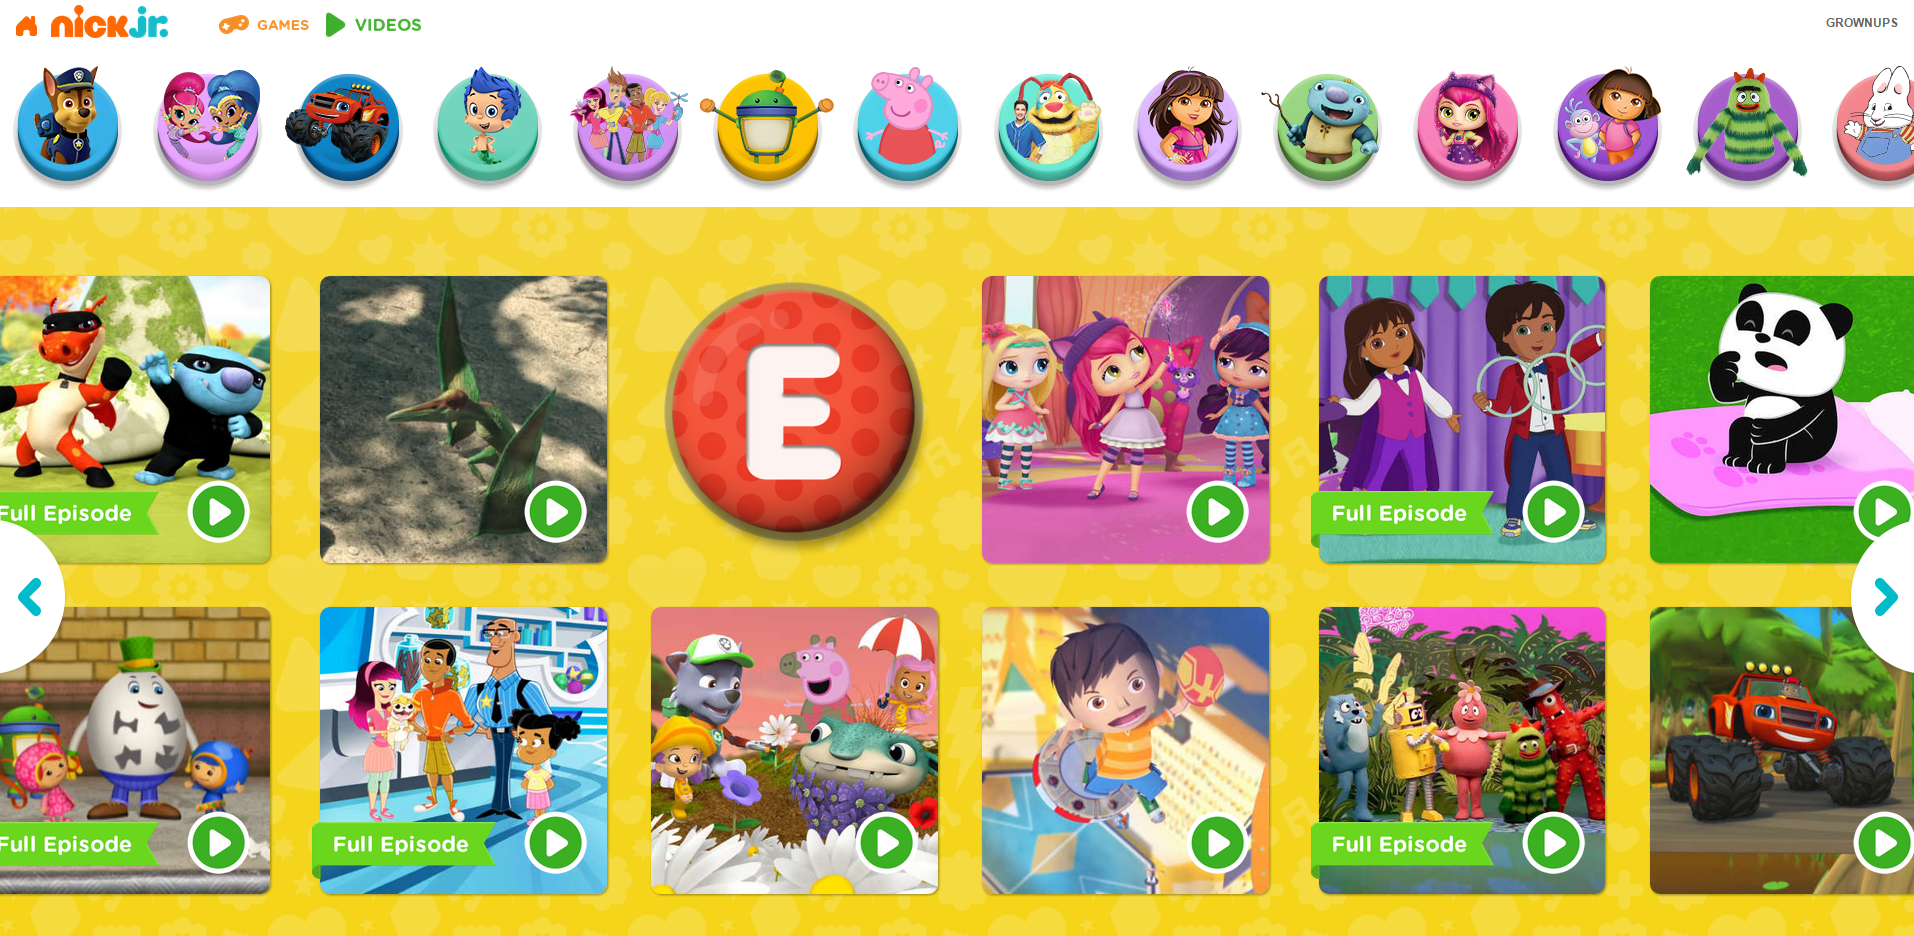 Image - FBBOS NickJr.com Videos.png | Fresh Beat Band of Spies Wiki ...